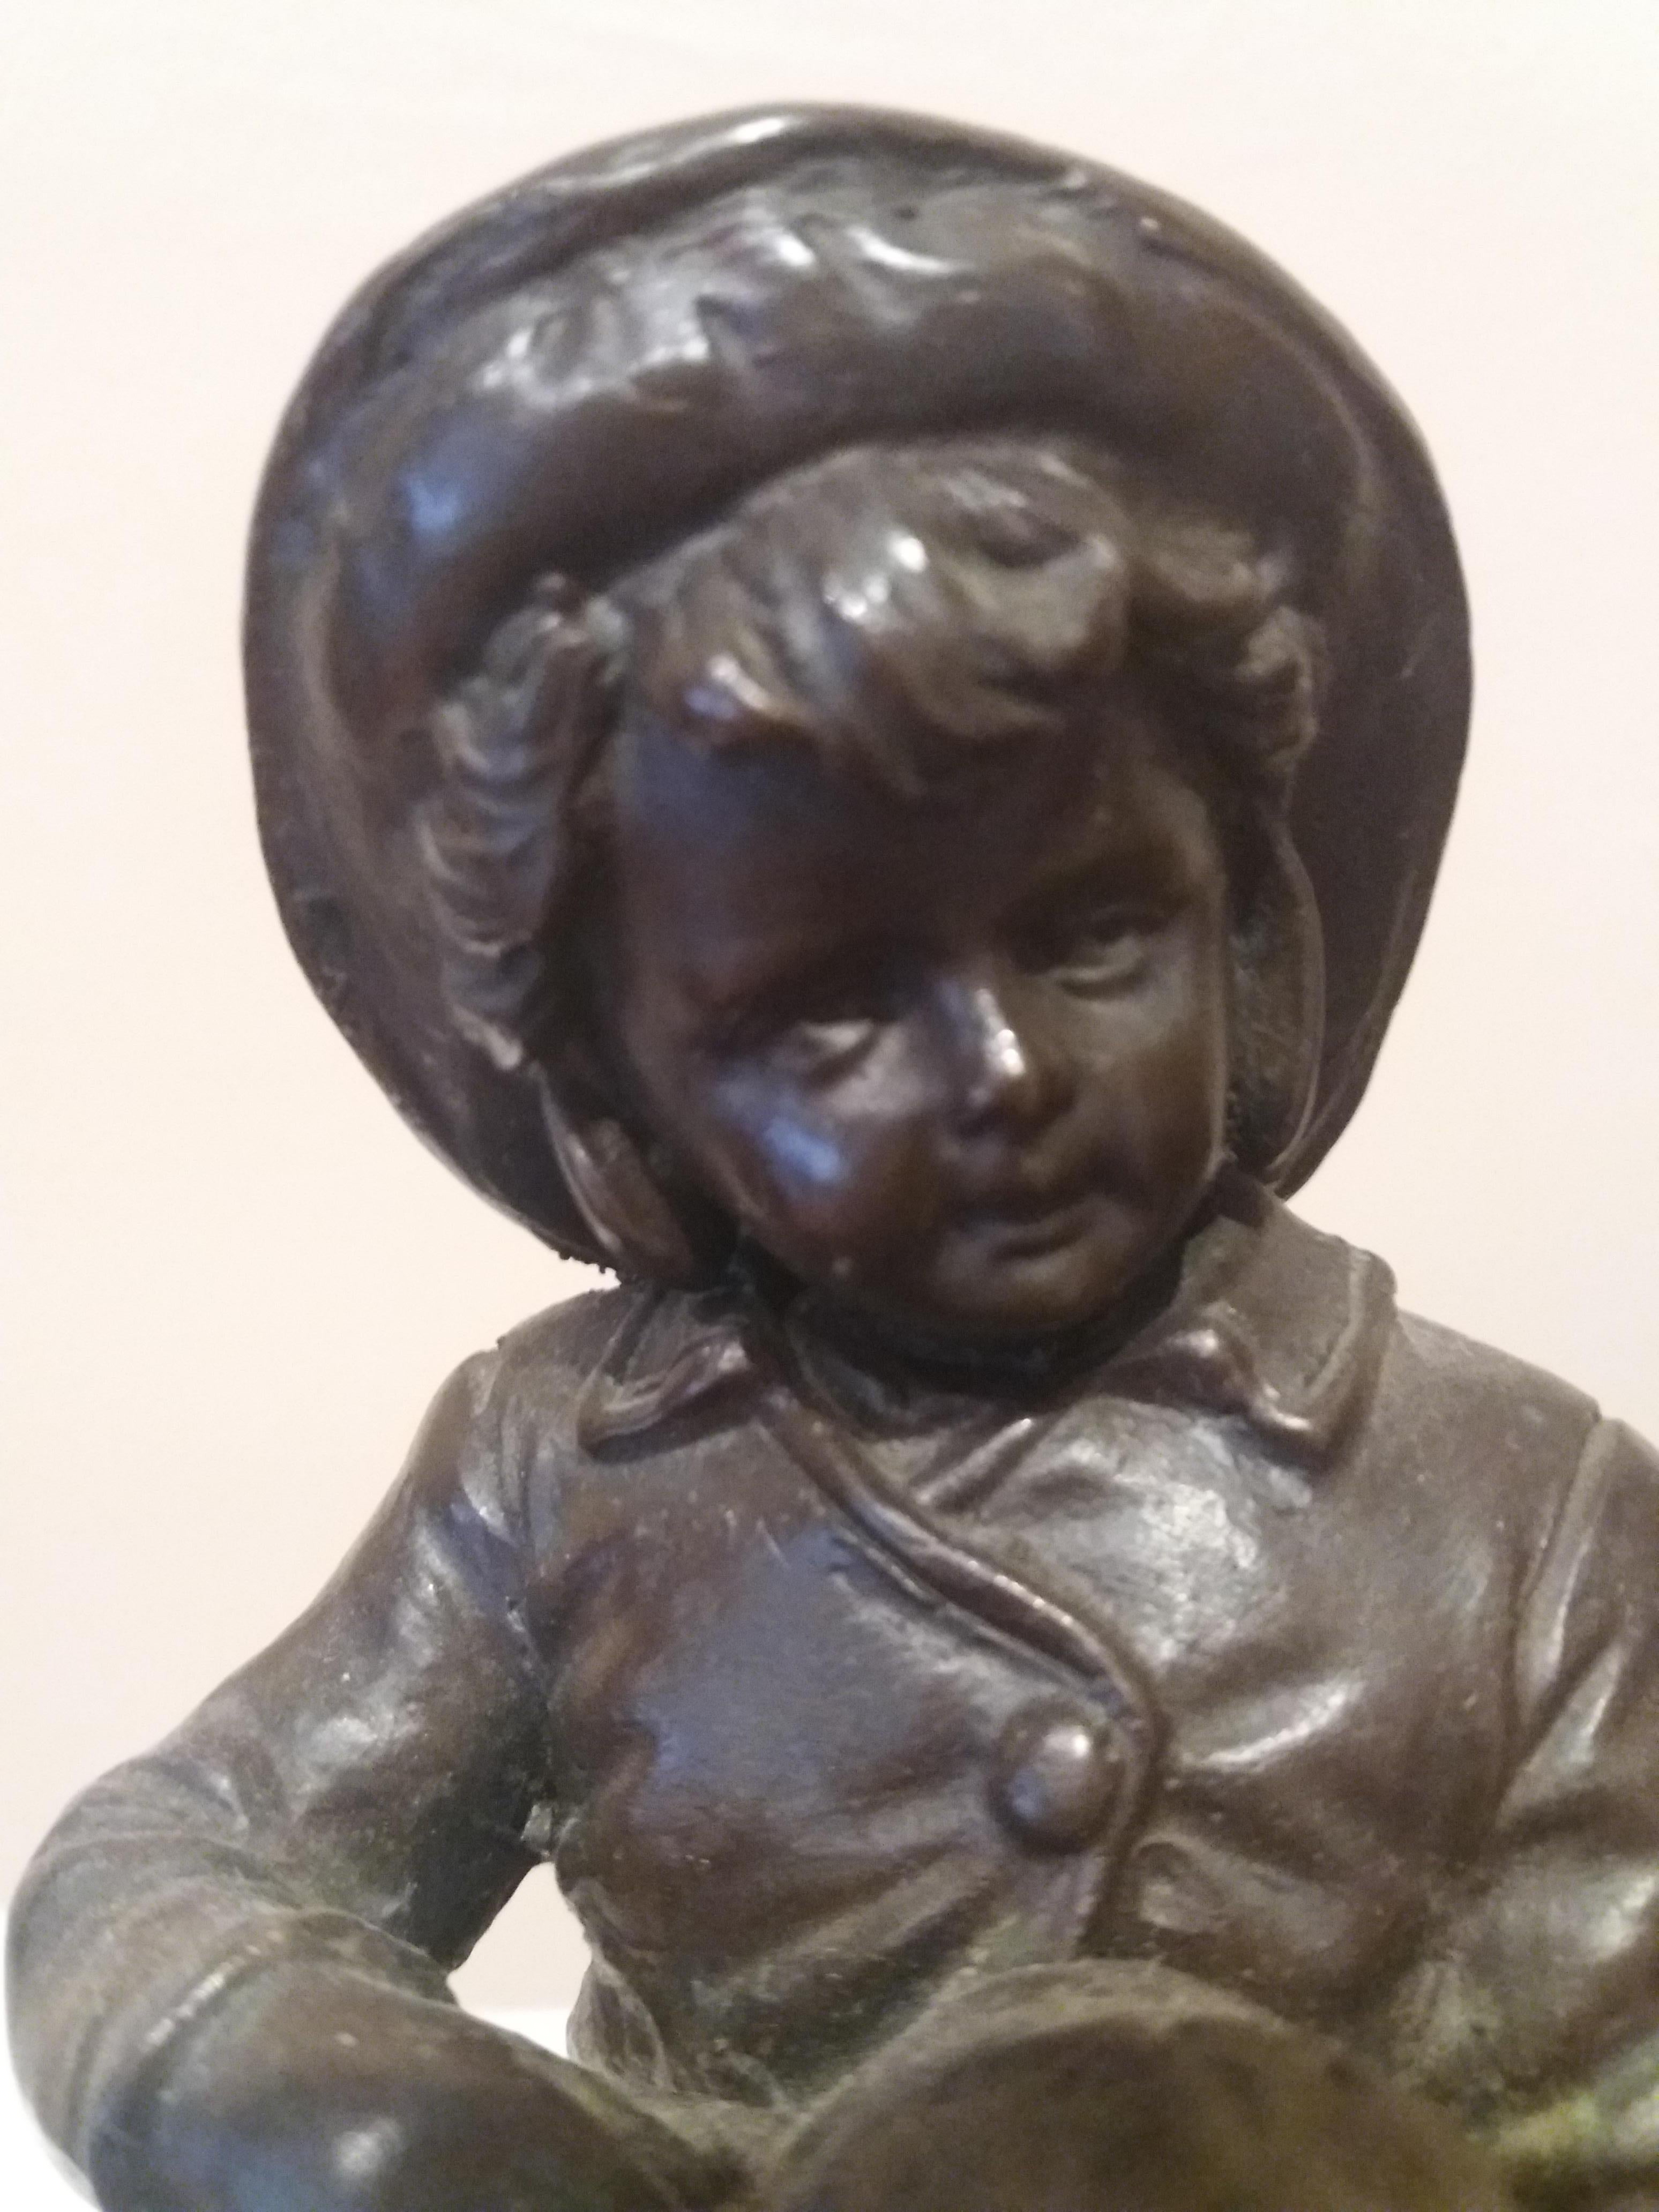  Bollel 23  Child and conch shell. Original multiple bronze sculpture - Sculpture by BOLLEL